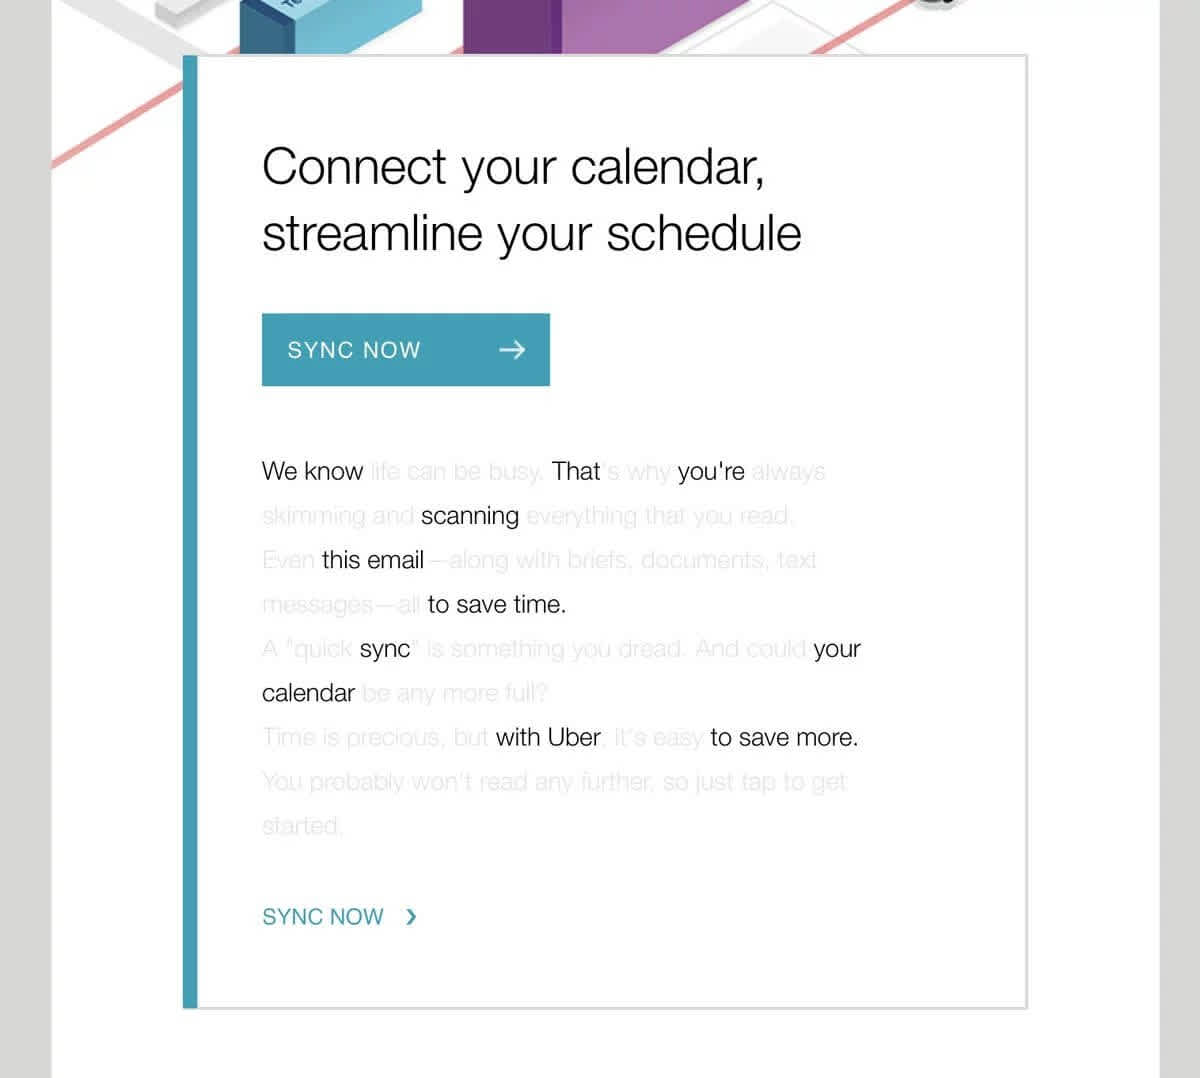 Email for connecting calendar